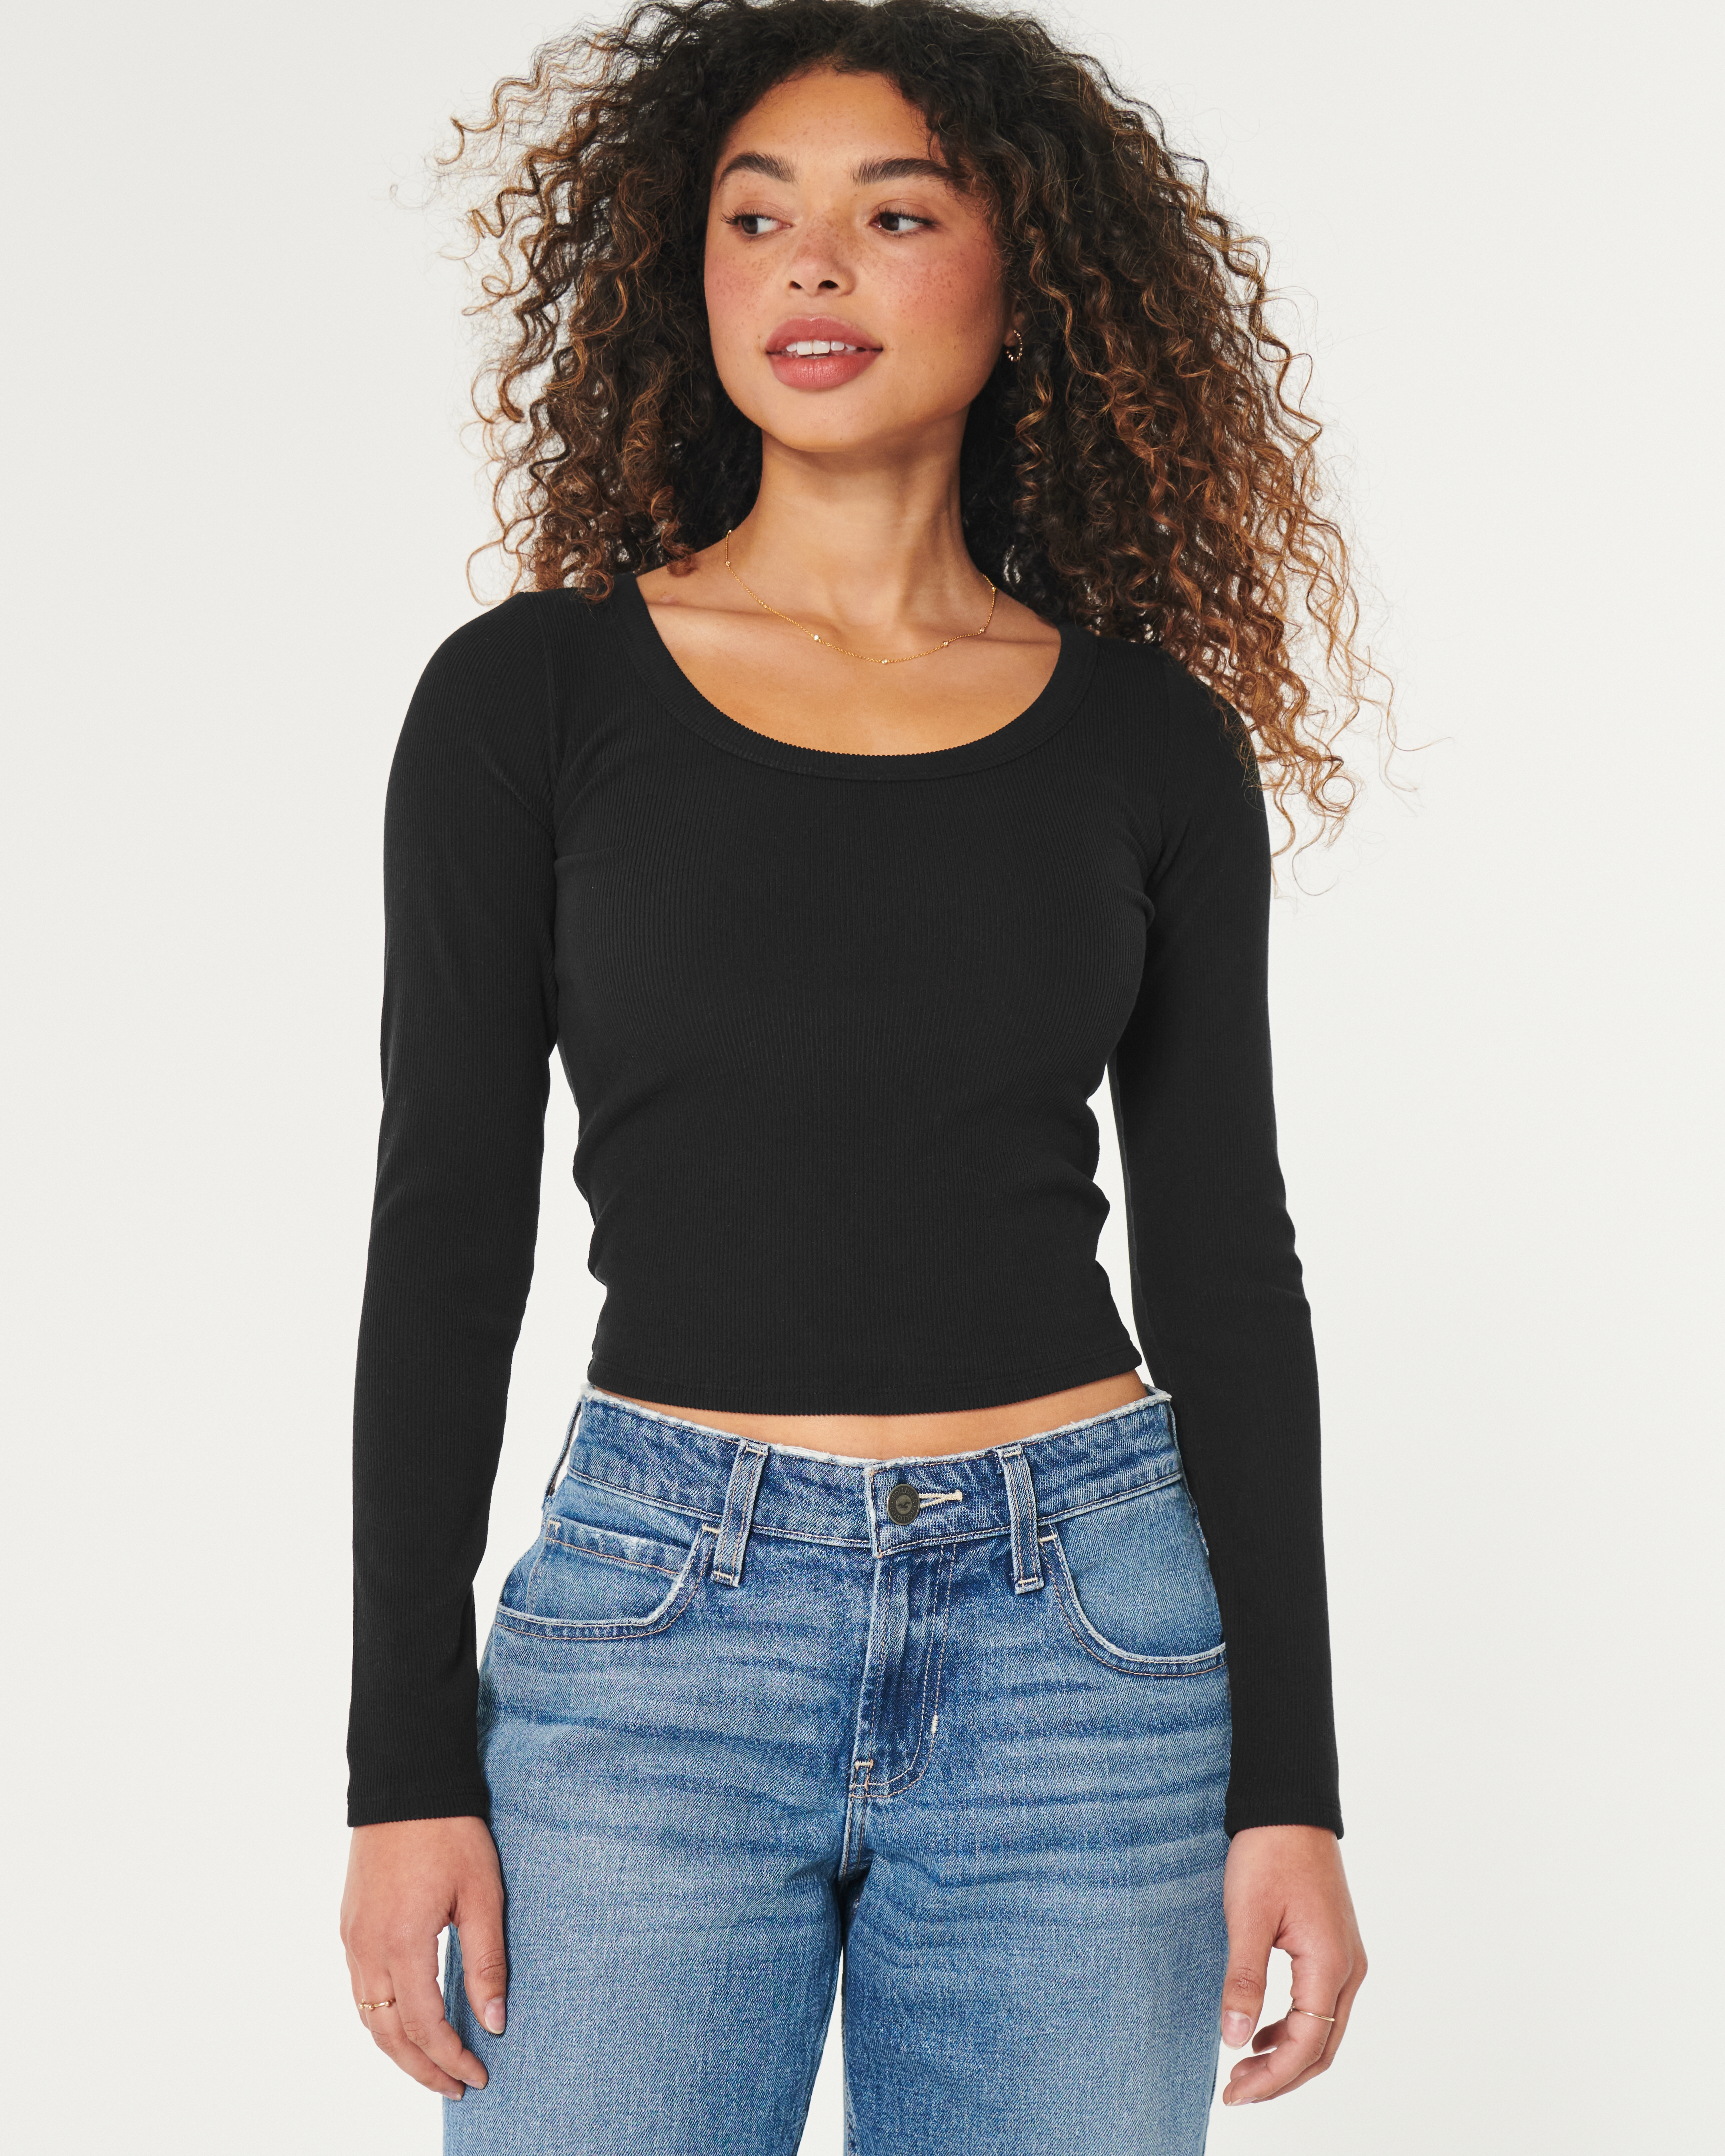 Ribbed Seamless Fabric Scoop Top